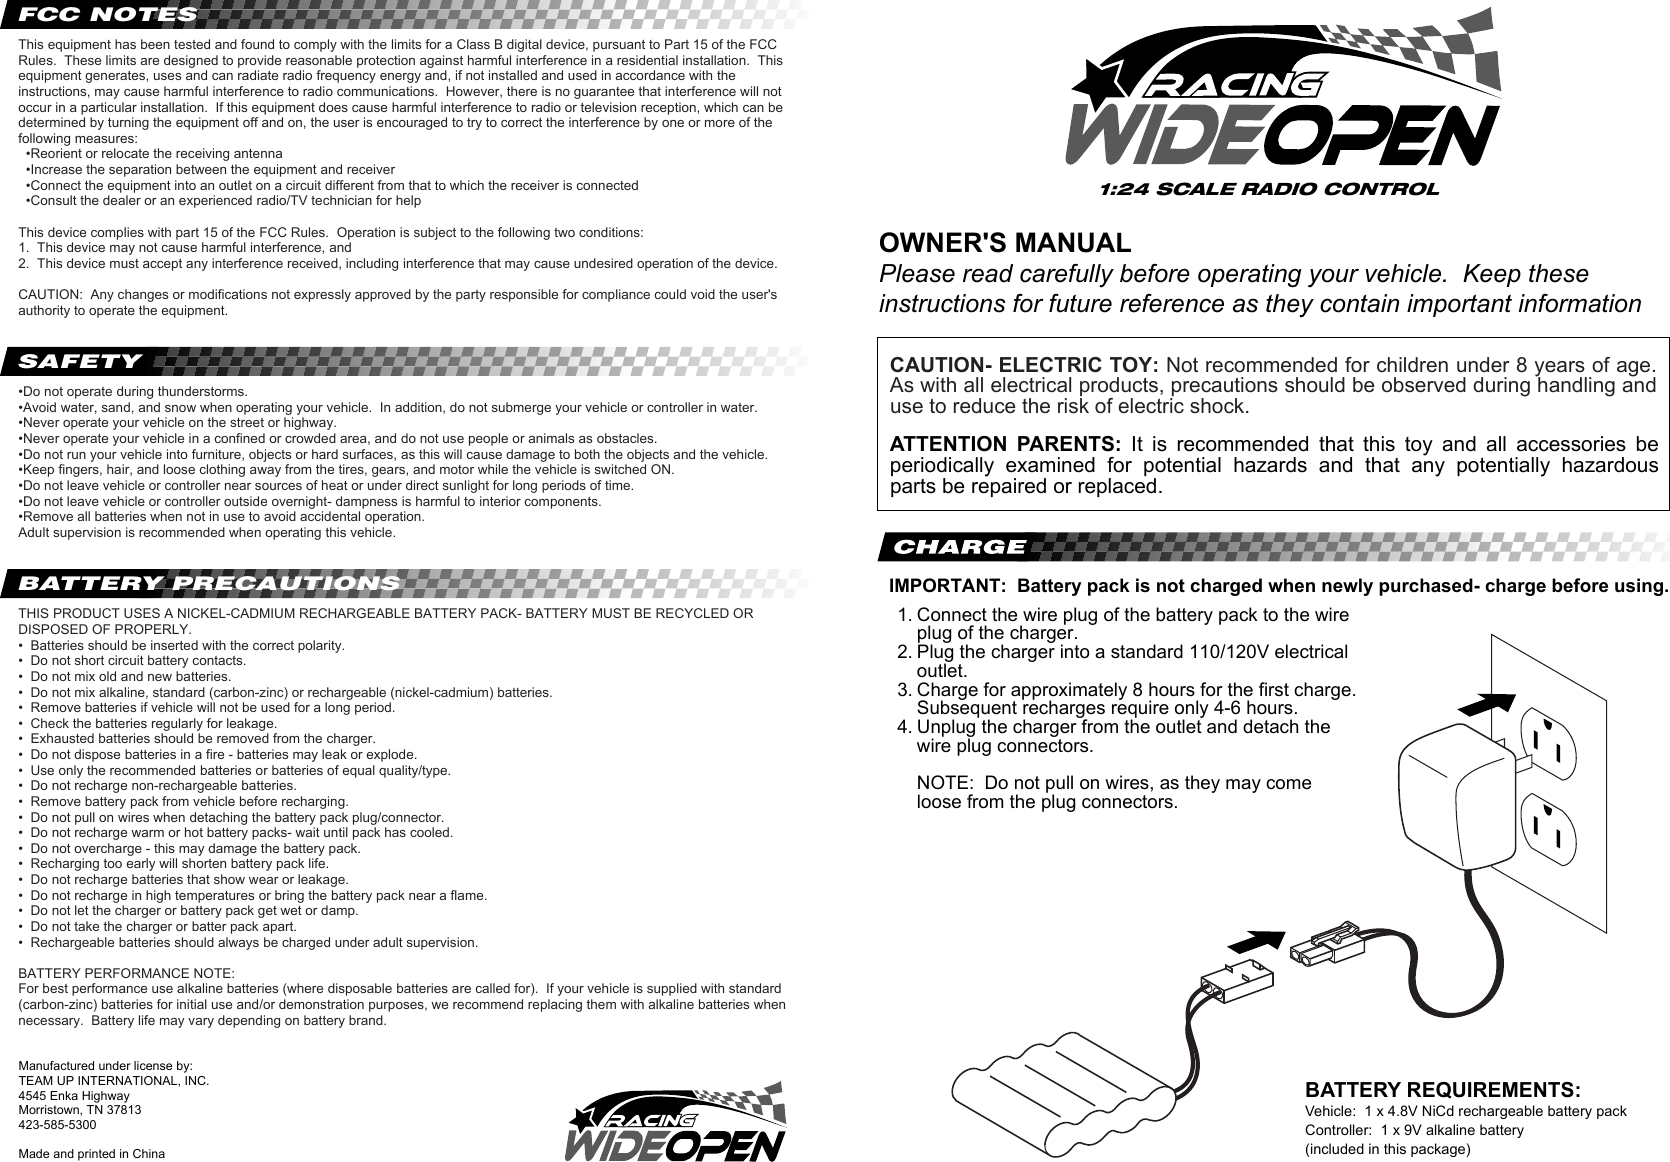 BATTERY REQUIREMENTS:Vehicle:  1 x 4.8V NiCd rechargeable battery packController:  1 x 9V alkaline battery(included in this package)OWNER&apos;S MANUALPlease read carefully before operating your vehicle.  Keep these instructions for future reference as they contain important informationManufactured under license by:TEAM UP INTERNATIONAL, INC.4545 Enka HighwayMorristown, TN 37813423-585-5300Made and printed in ChinaConnect the wire plug of the battery pack to the wire plug of the charger.Plug the charger into a standard 110/120V electrical outlet.Charge for approximately 8 hours for the first charge.  Subsequent recharges require only 4-6 hours.  Unplug the charger from the outlet and detach the wire plug connectors.  NOTE:  Do not pull on wires, as they may come loose from the plug connectors.1.    2. 3.4.IMPORTANT:  Battery pack is not charged when newly purchased- charge before using.ATTENTION  PARENTS:  It  is  recommended  that  this  toy  and  all  accessories  be periodically  examined  for  potential  hazards  and  that  any  potentially  hazardous parts be repaired or replaced.THIS PRODUCT USES A NICKEL-CADMIUM RECHARGEABLE BATTERY PACK- BATTERY MUST BE RECYCLED OR DISPOSED OF PROPERLY.•  Batteries should be inserted with the correct polarity.•  Do not short circuit battery contacts.•  Do not mix old and new batteries.•  Do not mix alkaline, standard (carbon-zinc) or rechargeable (nickel-cadmium) batteries.•  Remove batteries if vehicle will not be used for a long period.•  Check the batteries regularly for leakage.•  Exhausted batteries should be removed from the charger.•  Do not dispose batteries in a fire - batteries may leak or explode.•  Use only the recommended batteries or batteries of equal quality/type.•  Do not recharge non-rechargeable batteries.•  Remove battery pack from vehicle before recharging.•  Do not pull on wires when detaching the battery pack plug/connector.•  Do not recharge warm or hot battery packs- wait until pack has cooled.•  Do not overcharge - this may damage the battery pack.•  Recharging too early will shorten battery pack life.•  Do not recharge batteries that show wear or leakage.•  Do not recharge in high temperatures or bring the battery pack near a flame.•  Do not let the charger or battery pack get wet or damp.•  Do not take the charger or batter pack apart.•  Rechargeable batteries should always be charged under adult supervision.BATTERY PERFORMANCE NOTE:For best performance use alkaline batteries (where disposable batteries are called for).  If your vehicle is supplied with standard (carbon-zinc) batteries for initial use and/or demonstration purposes, we recommend replacing them with alkaline batteries when necessary.  Battery life may vary depending on battery brand.•Do not operate during thunderstorms.•Avoid water, sand, and snow when operating your vehicle.  In addition, do not submerge your vehicle or controller in water.•Never operate your vehicle on the street or highway.•Never operate your vehicle in a confined or crowded area, and do not use people or animals as obstacles.•Do not run your vehicle into furniture, objects or hard surfaces, as this will cause damage to both the objects and the vehicle.•Keep fingers, hair, and loose clothing away from the tires, gears, and motor while the vehicle is switched ON.•Do not leave vehicle or controller near sources of heat or under direct sunlight for long periods of time.•Do not leave vehicle or controller outside overnight- dampness is harmful to interior components.•Remove all batteries when not in use to avoid accidental operation.Adult supervision is recommended when operating this vehicle.This equipment has been tested and found to comply with the limits for a Class B digital device, pursuant to Part 15 of the FCC Rules.  These limits are designed to provide reasonable protection against harmful interference in a residential installation.  This equipment generates, uses and can radiate radio frequency energy and, if not installed and used in accordance with the instructions, may cause harmful interference to radio communications.  However, there is no guarantee that interference will not occur in a particular installation.  If this equipment does cause harmful interference to radio or television reception, which can be determined by turning the equipment off and on, the user is encouraged to try to correct the interference by one or more of the following measures:  •Reorient or relocate the receiving antenna  •Increase the separation between the equipment and receiver  •Connect the equipment into an outlet on a circuit different from that to which the receiver is connected  •Consult the dealer or an experienced radio/TV technician for helpThis device complies with part 15 of the FCC Rules.  Operation is subject to the following two conditions:1.  This device may not cause harmful interference, and2.  This device must accept any interference received, including interference that may cause undesired operation of the device.CAUTION:  Any changes or modifications not expressly approved by the party responsible for compliance could void the user&apos;s authority to operate the equipment.CAUTION- ELECTRIC TOY: Not recommended for children under 8 years of age. As with all electrical products, precautions should be observed during handling and use to reduce the risk of electric shock.FCC NOTESSAFETYBATTERY PRECAUTIONS1:24 SCALE RADIO CONTROL